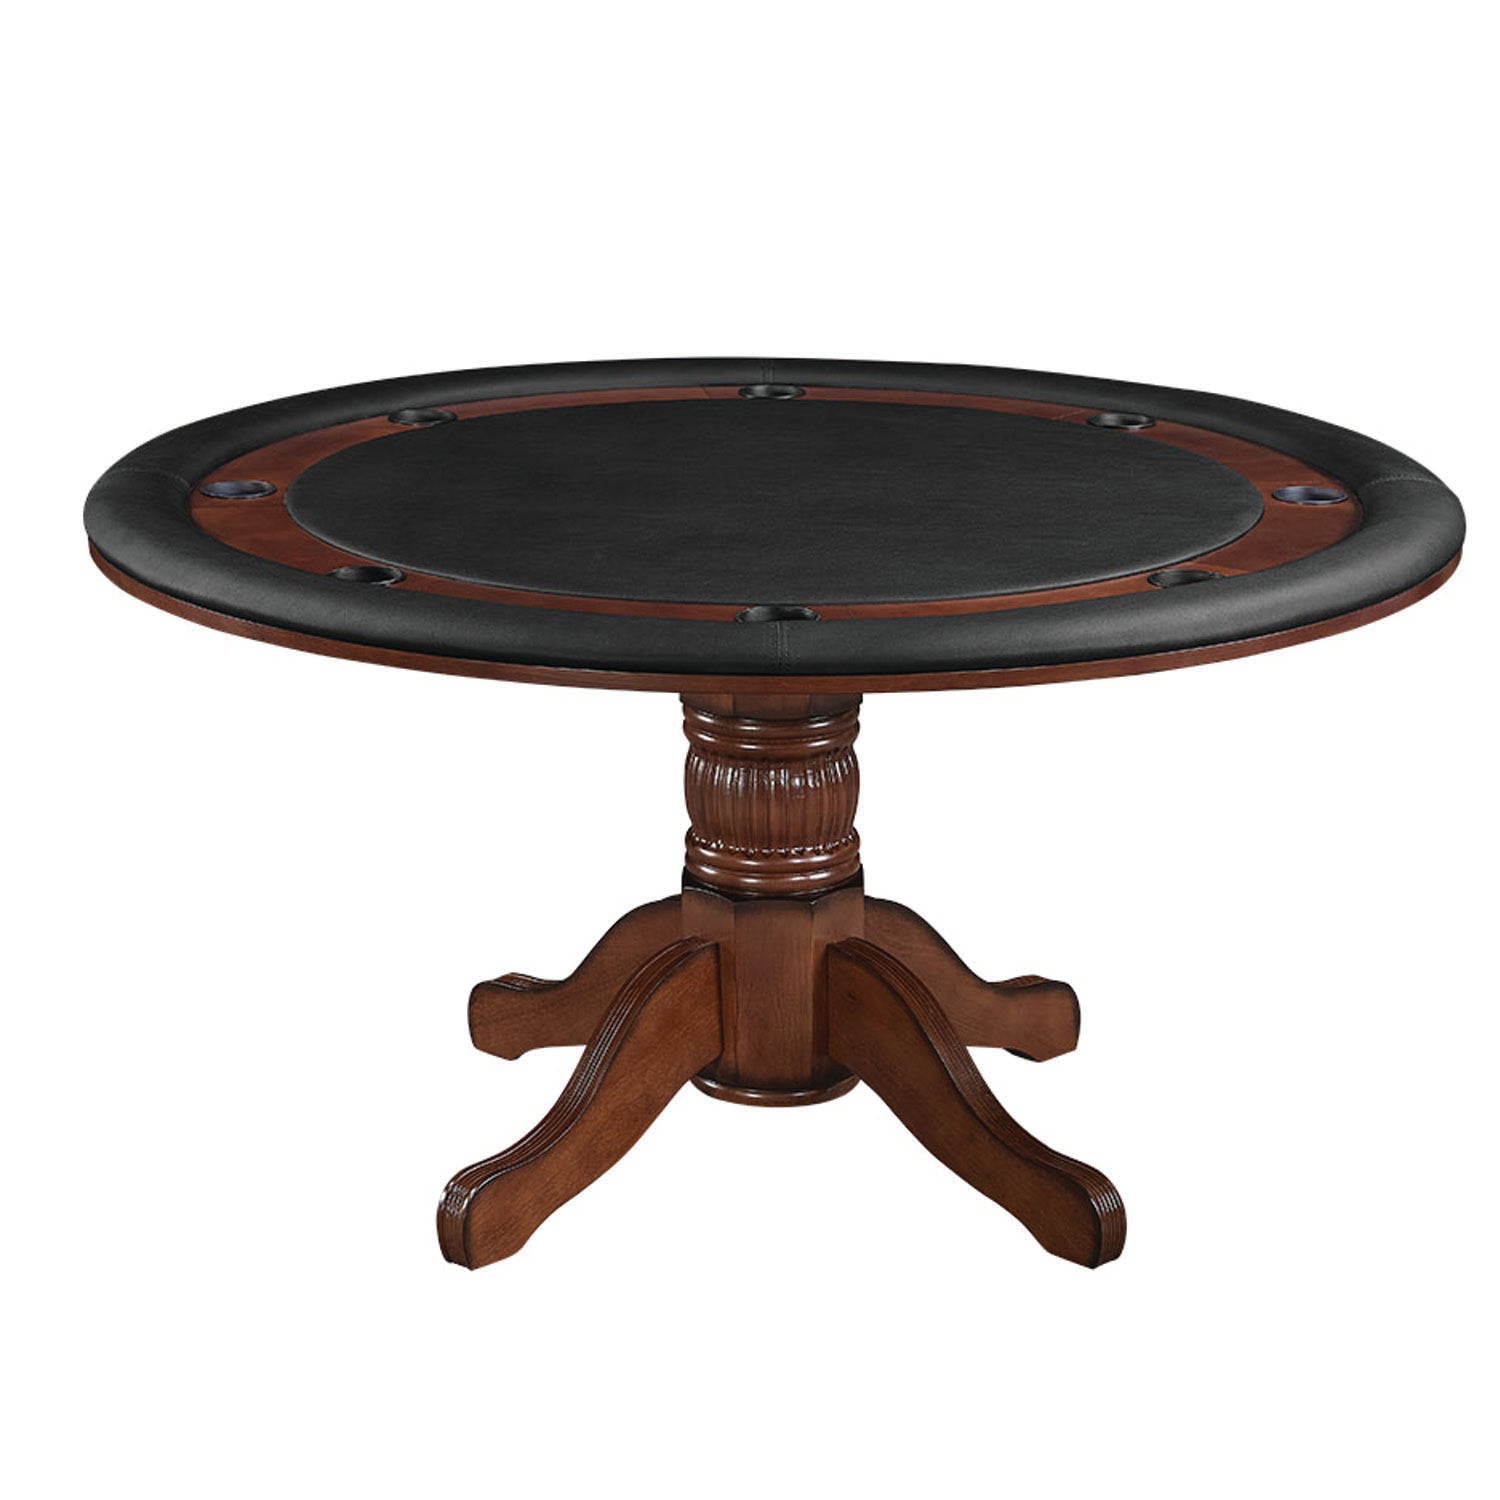 60" reversible round game table with vinyl padded game surface in a chestnut finish.